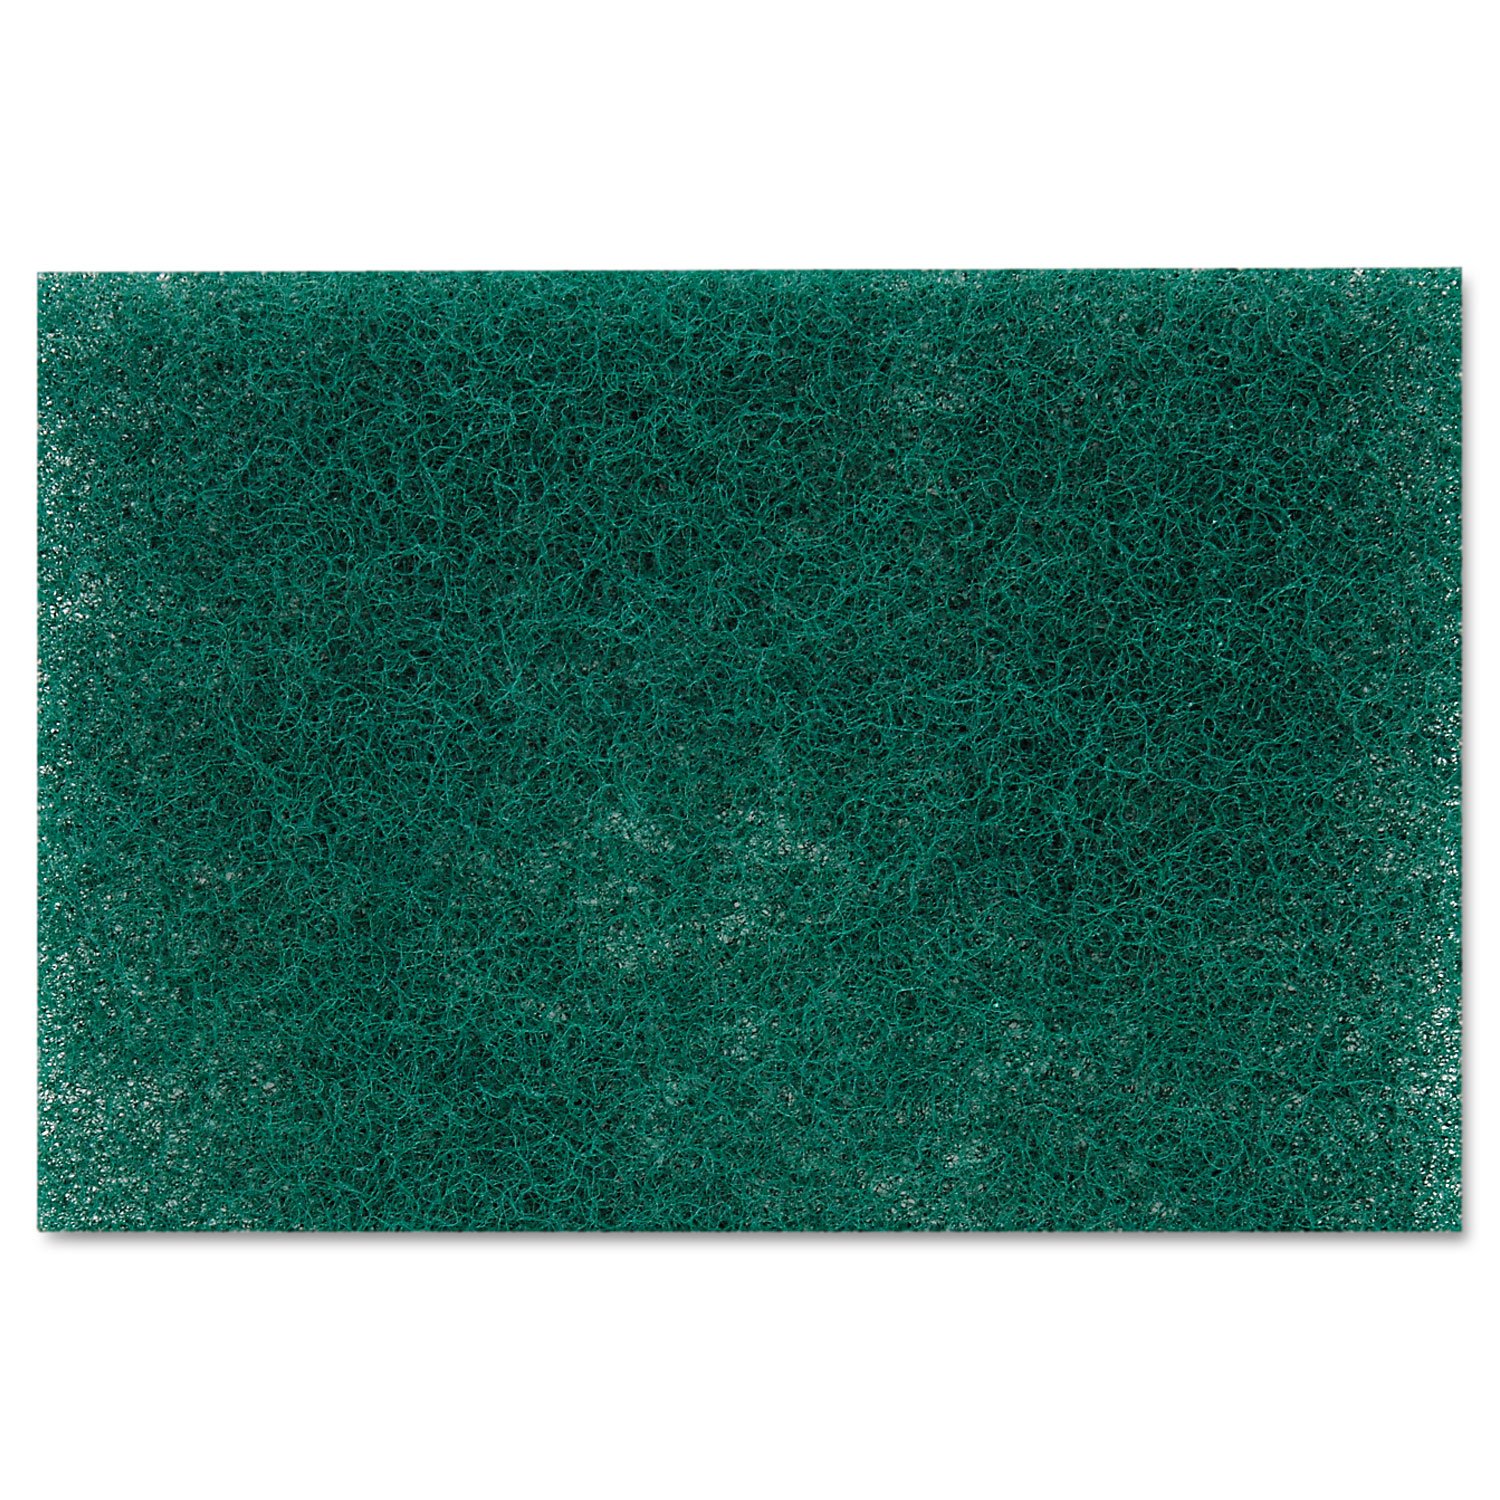  Scotch-Brite PROFESSIONAL 86 Commercial Heavy Duty Scouring Pad 86, 6 x 9, Green, 12/Pack, 3 Packs/Carton (MMM86CT) 